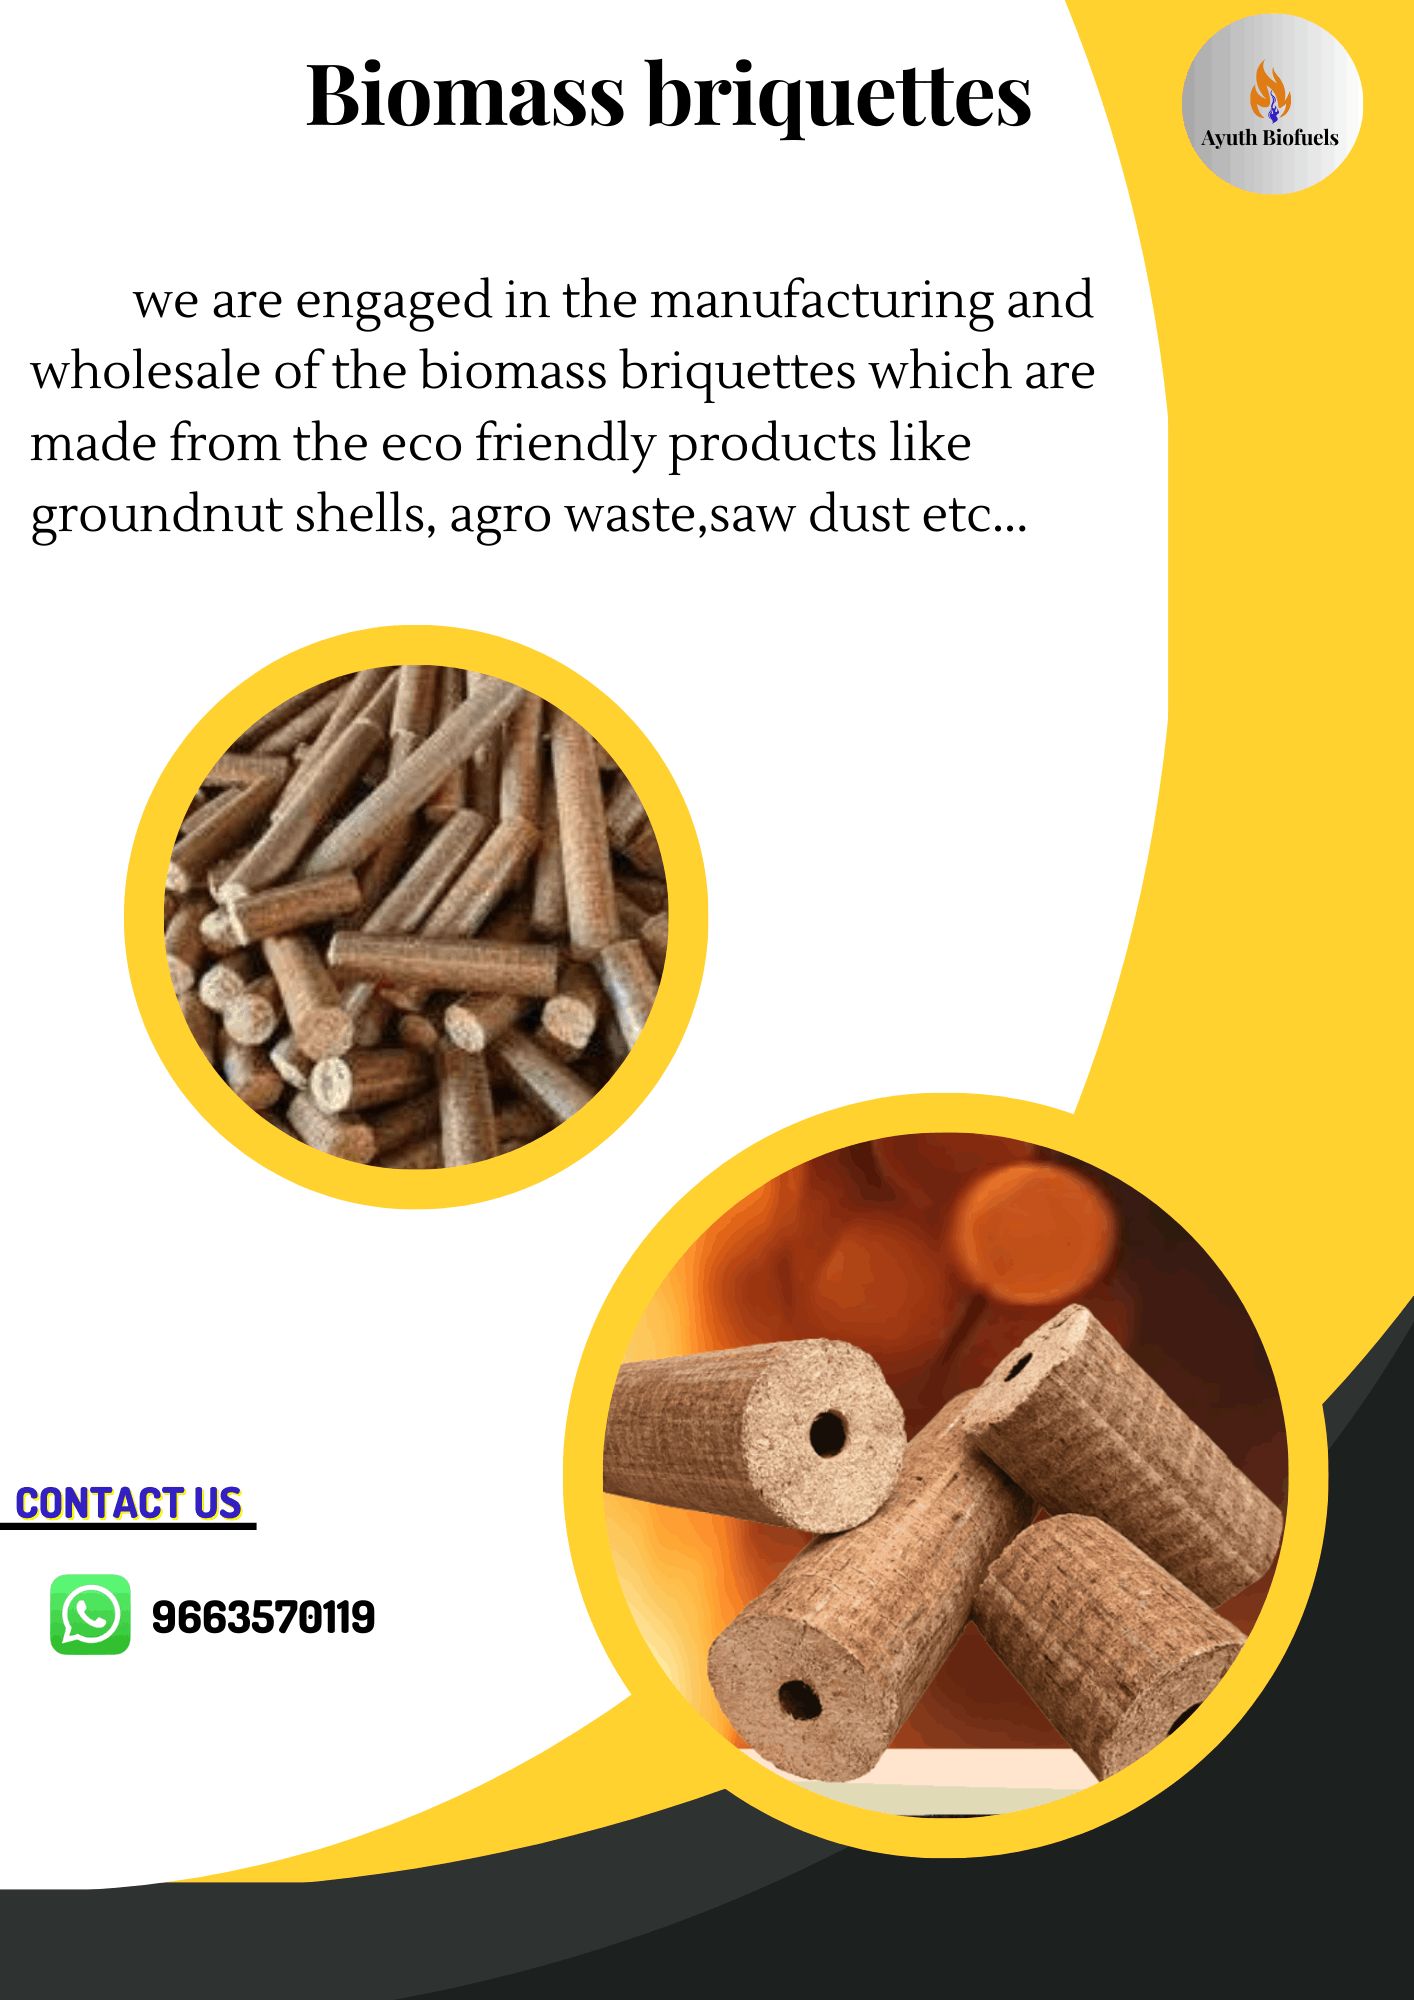 for sale,good condition,biofuels,briquettes,ayuth biofuels